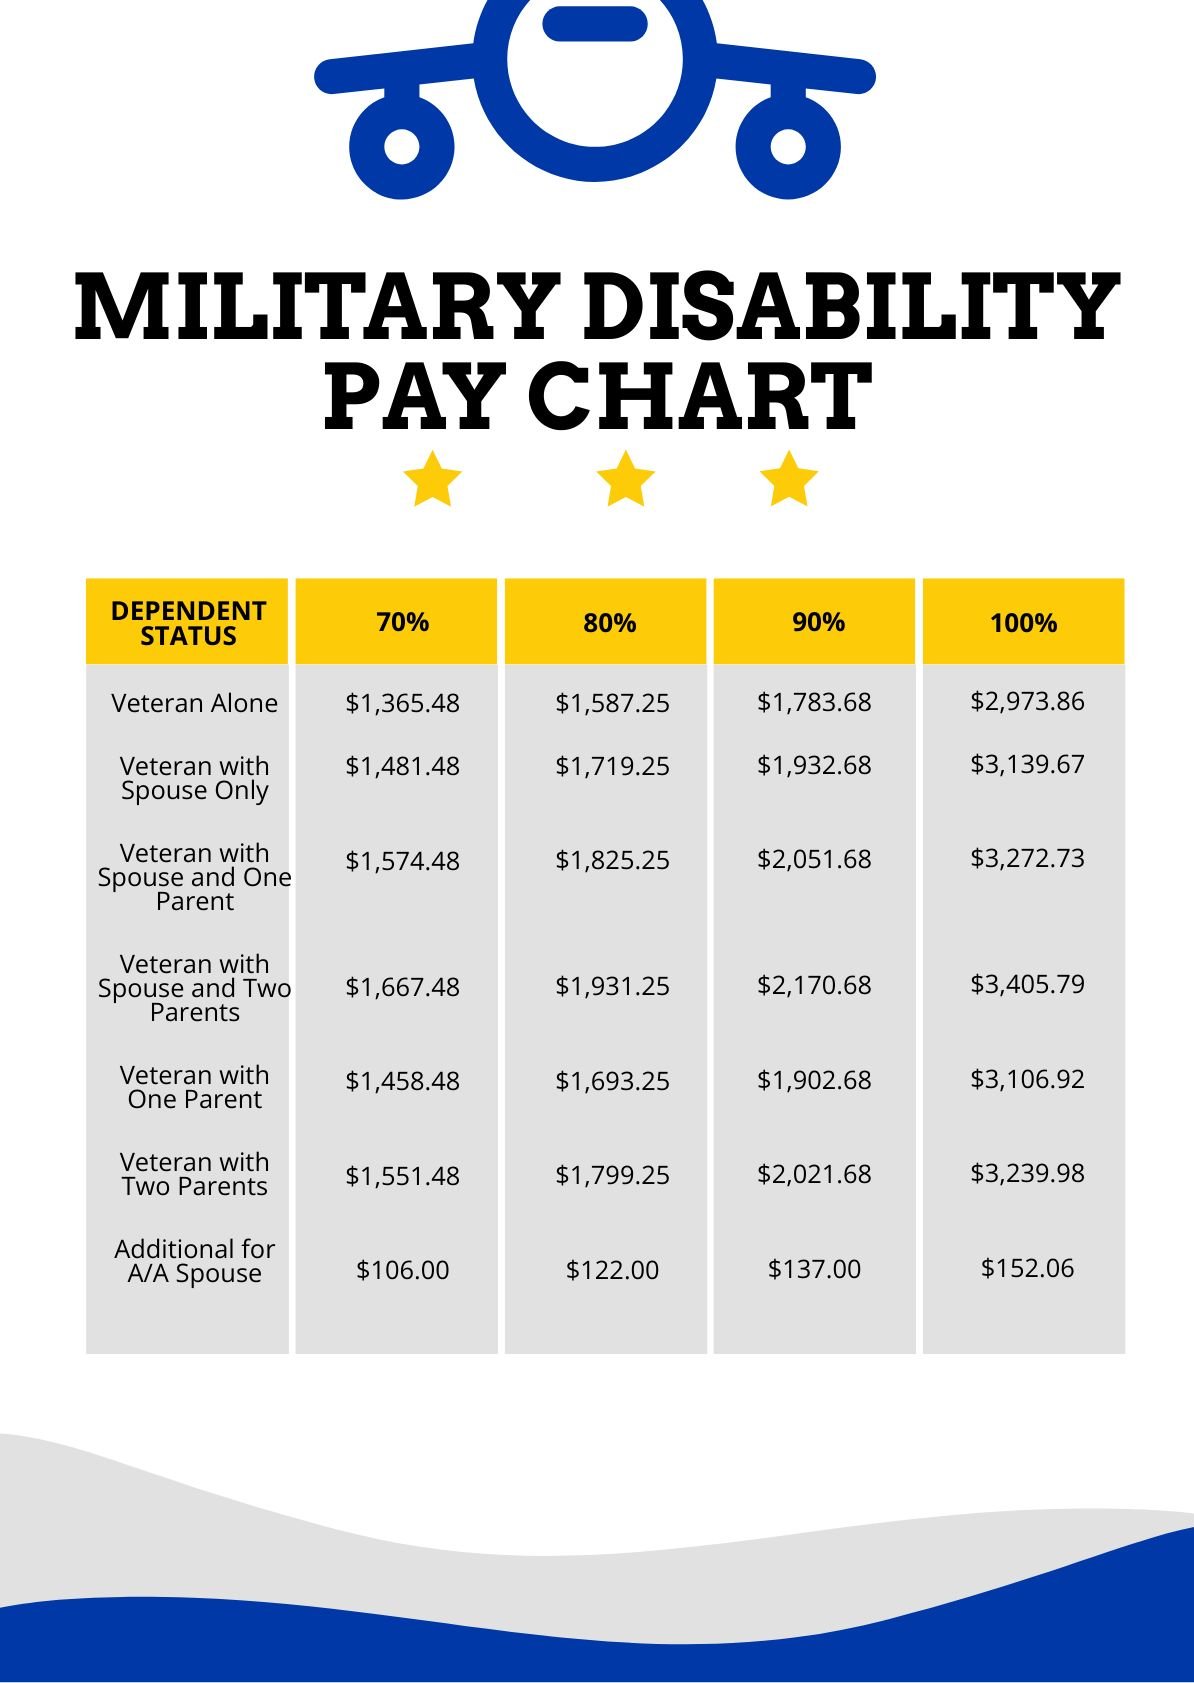 Military Disability Pay Chart in PDF